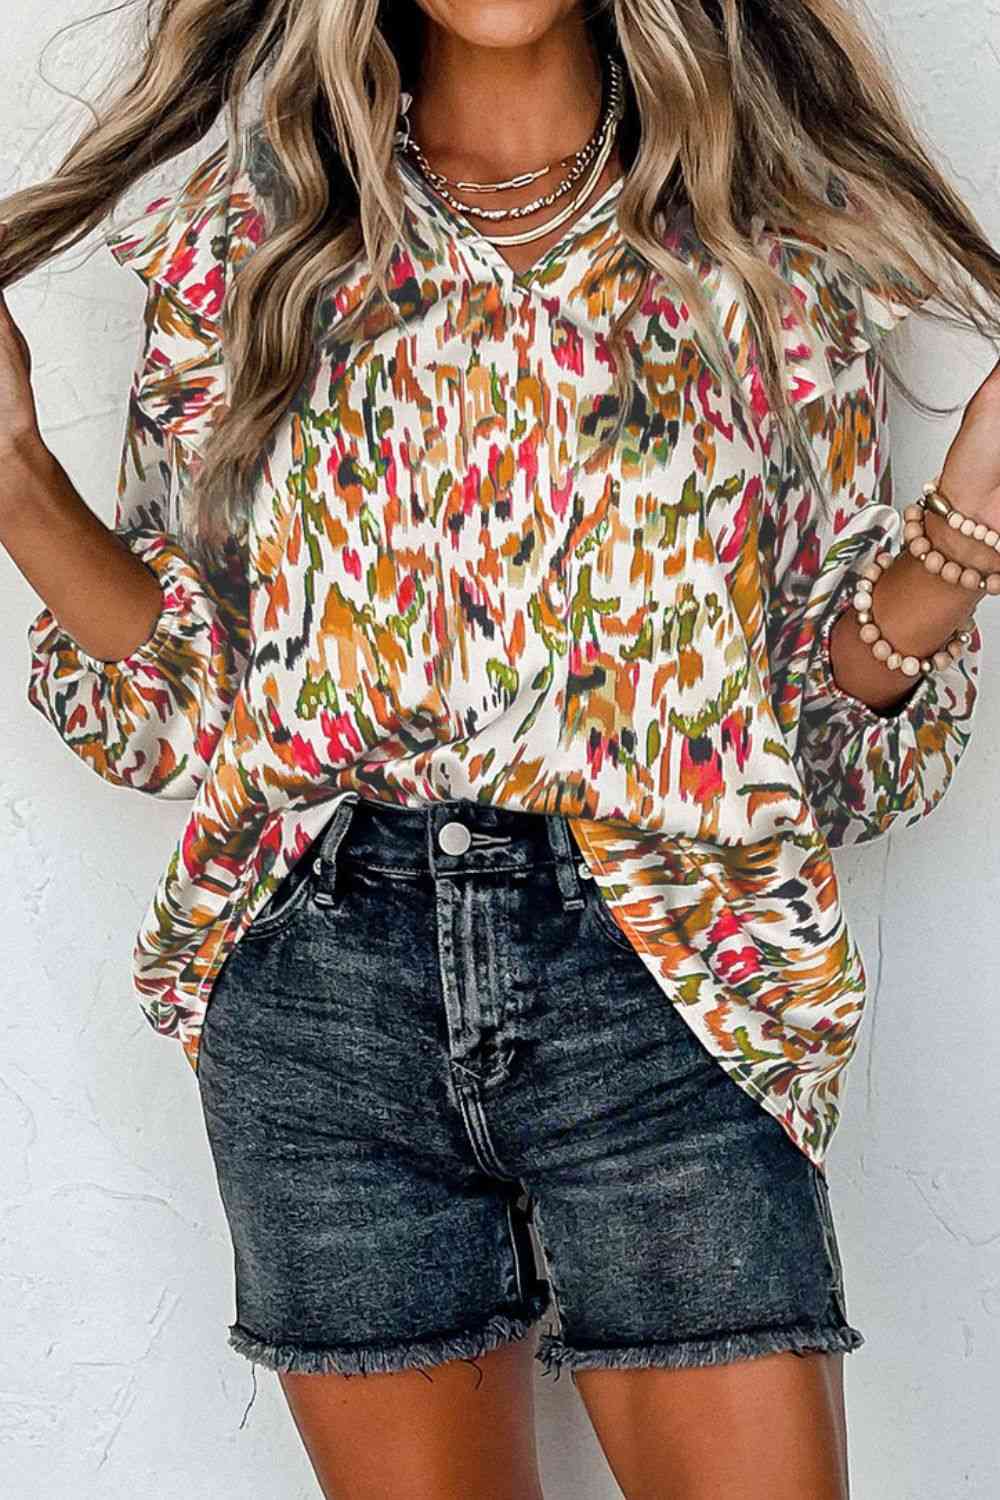 Printed Nochted Neck Ruffled Blouse